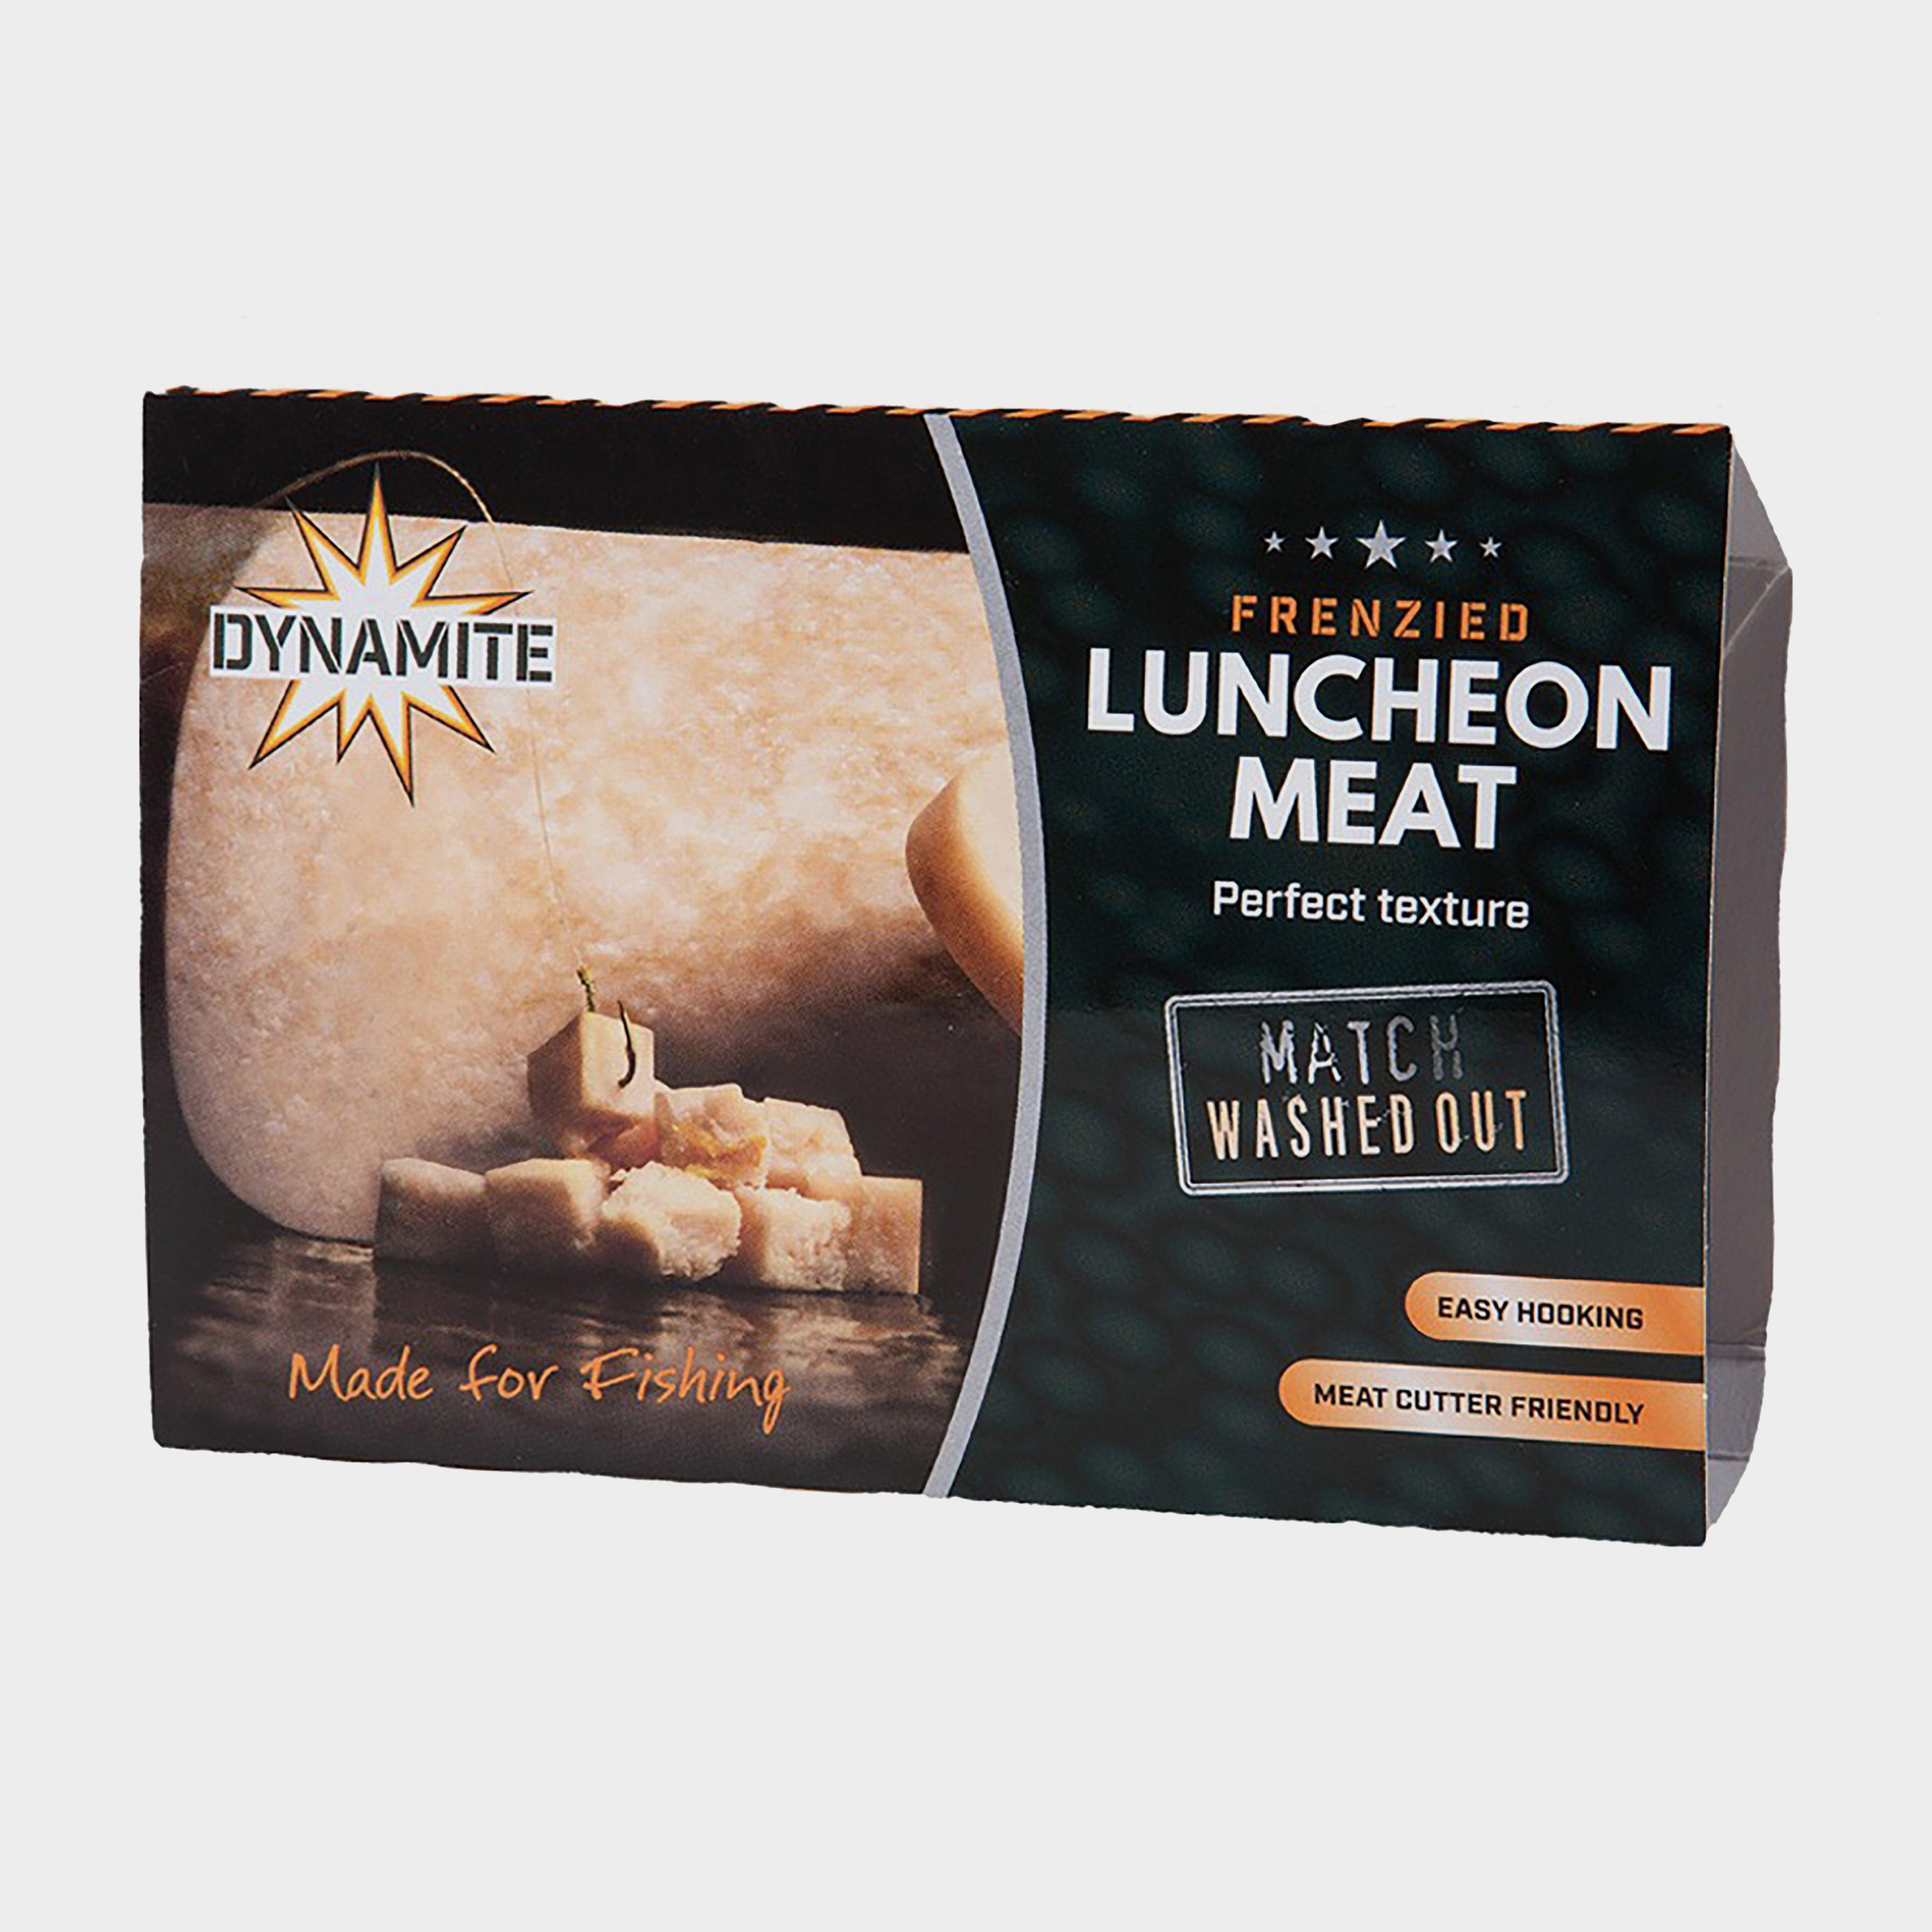 Dynamite Frenzied Match Luncheon Meat - Lunche/lunche  Lunche/lunche